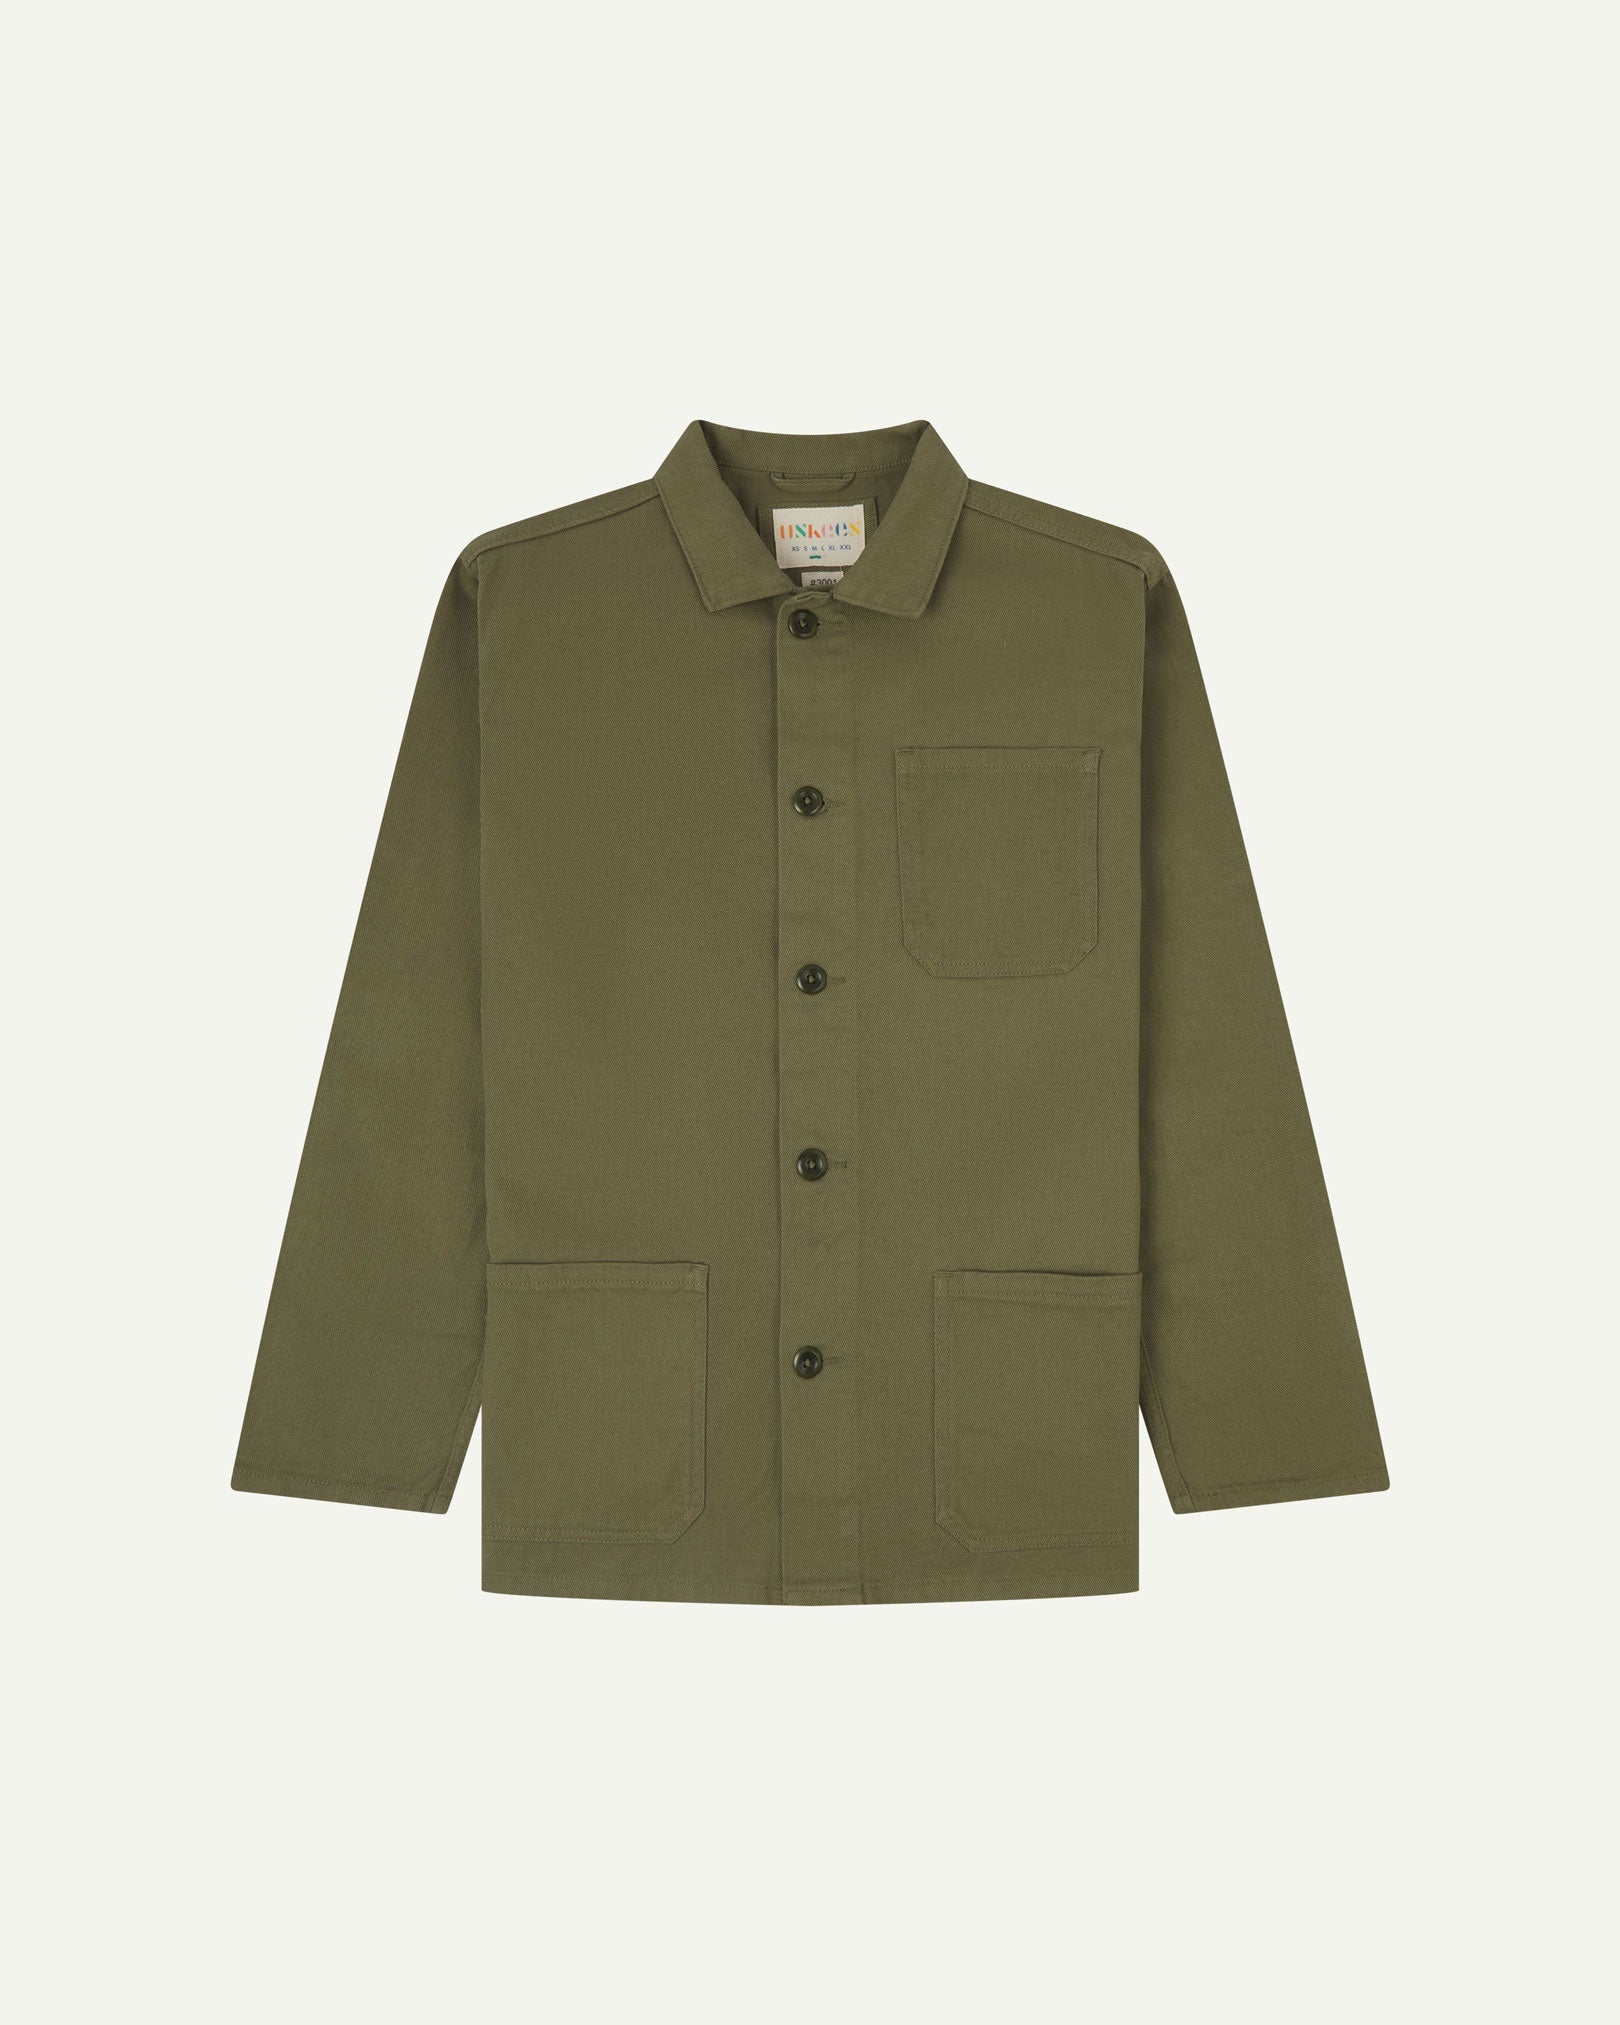 Front flat shot of moss-green, buttoned drill overshirt. Clear view of corozo buttons, 3 pockets and Uskees branding label.